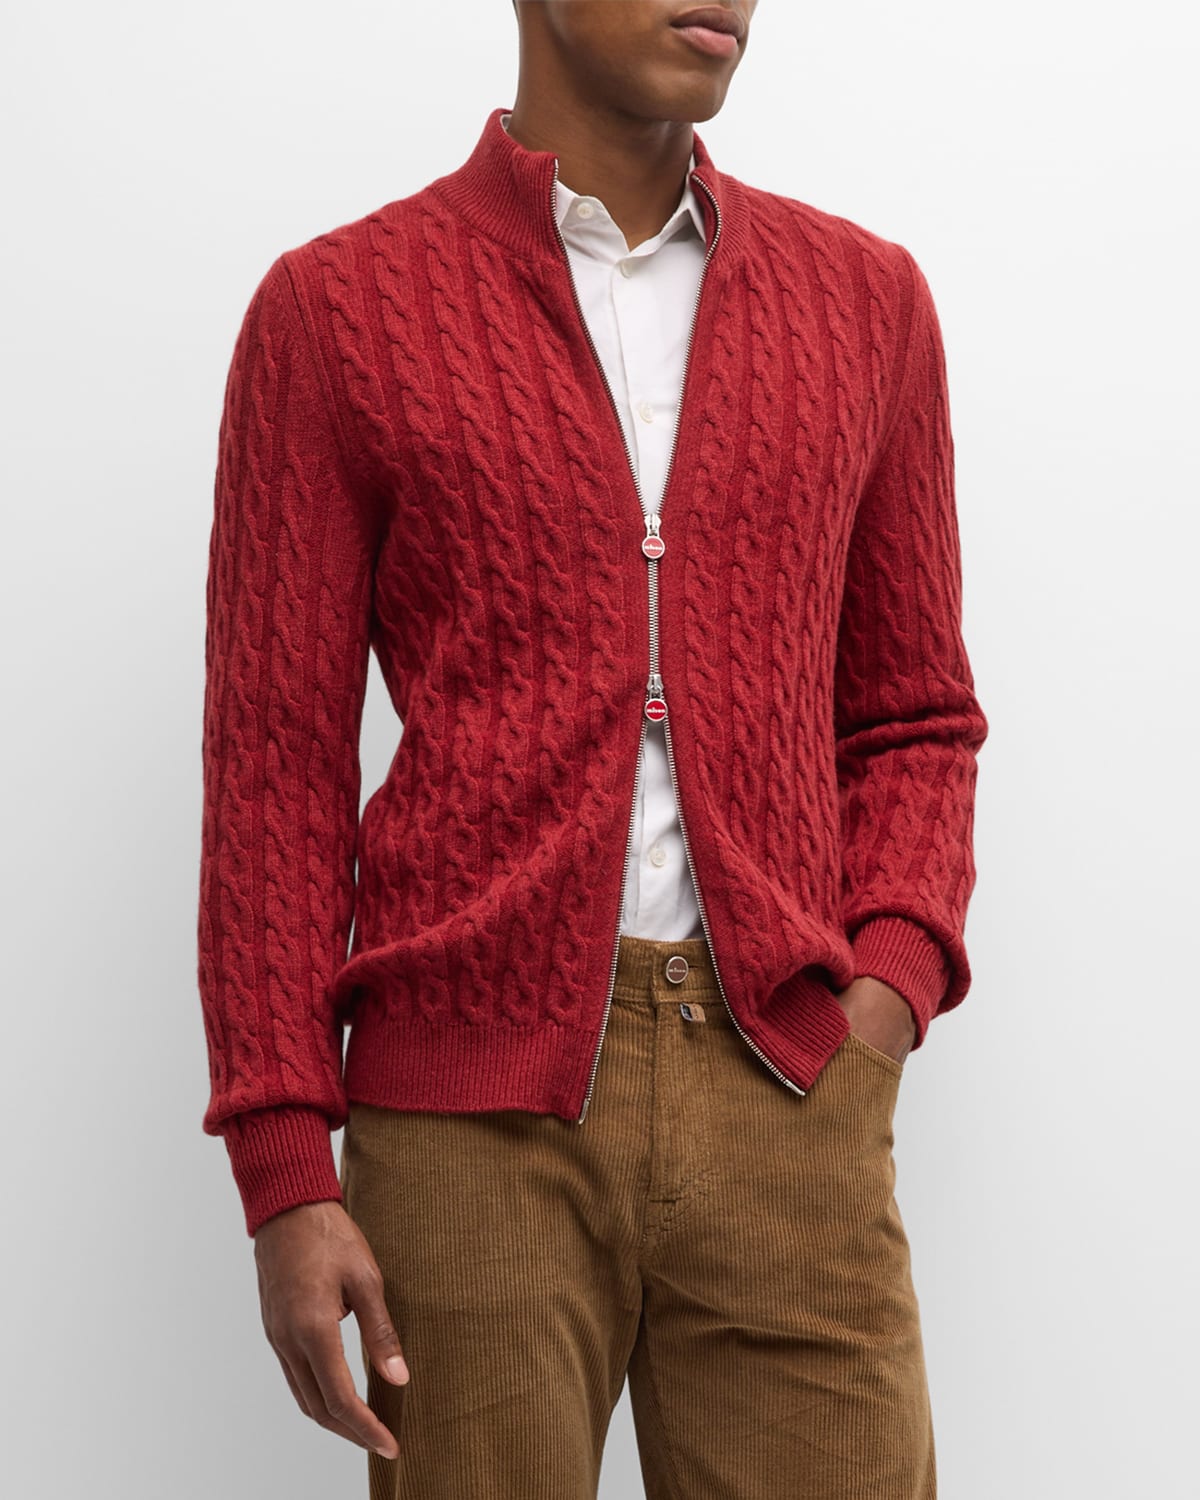 Kiton Men's Cable-knit Full-zip Sweater In Red